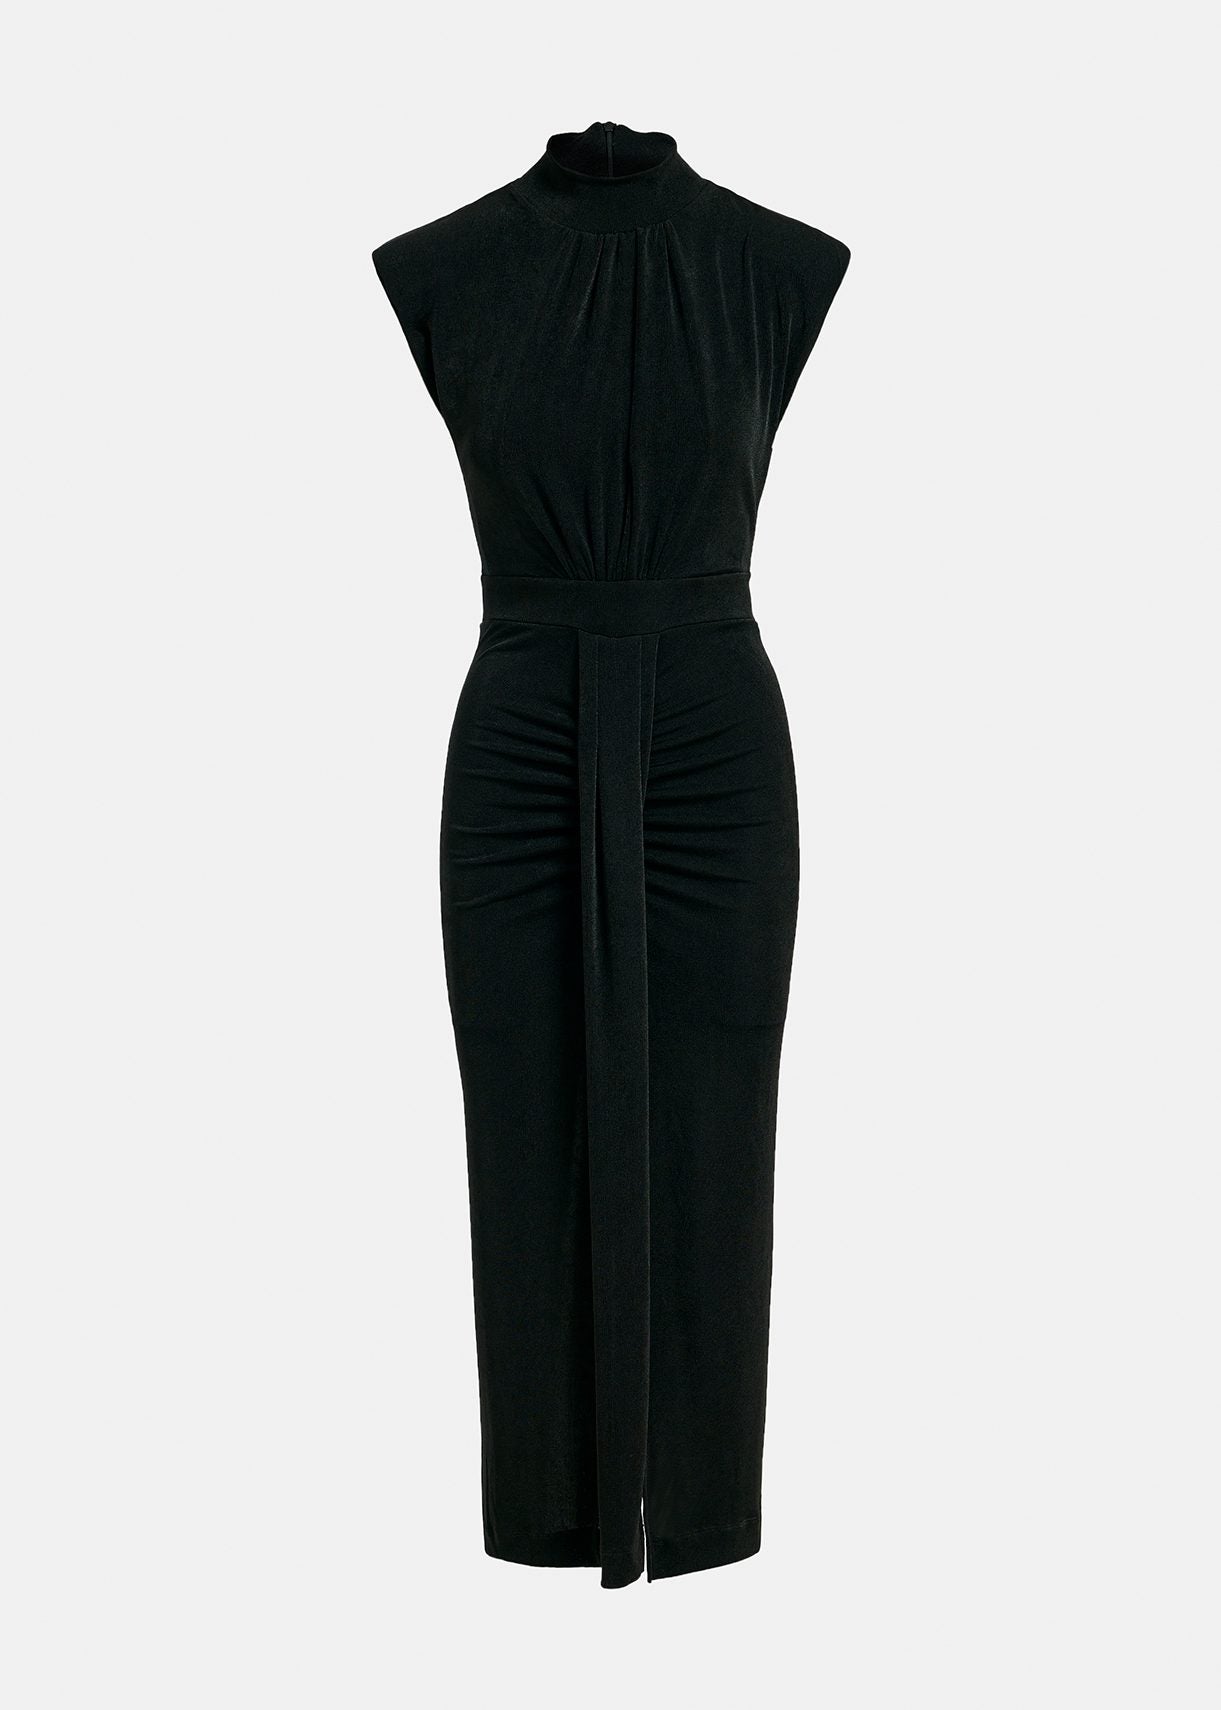 Black midi dress with pleat and slit at front.